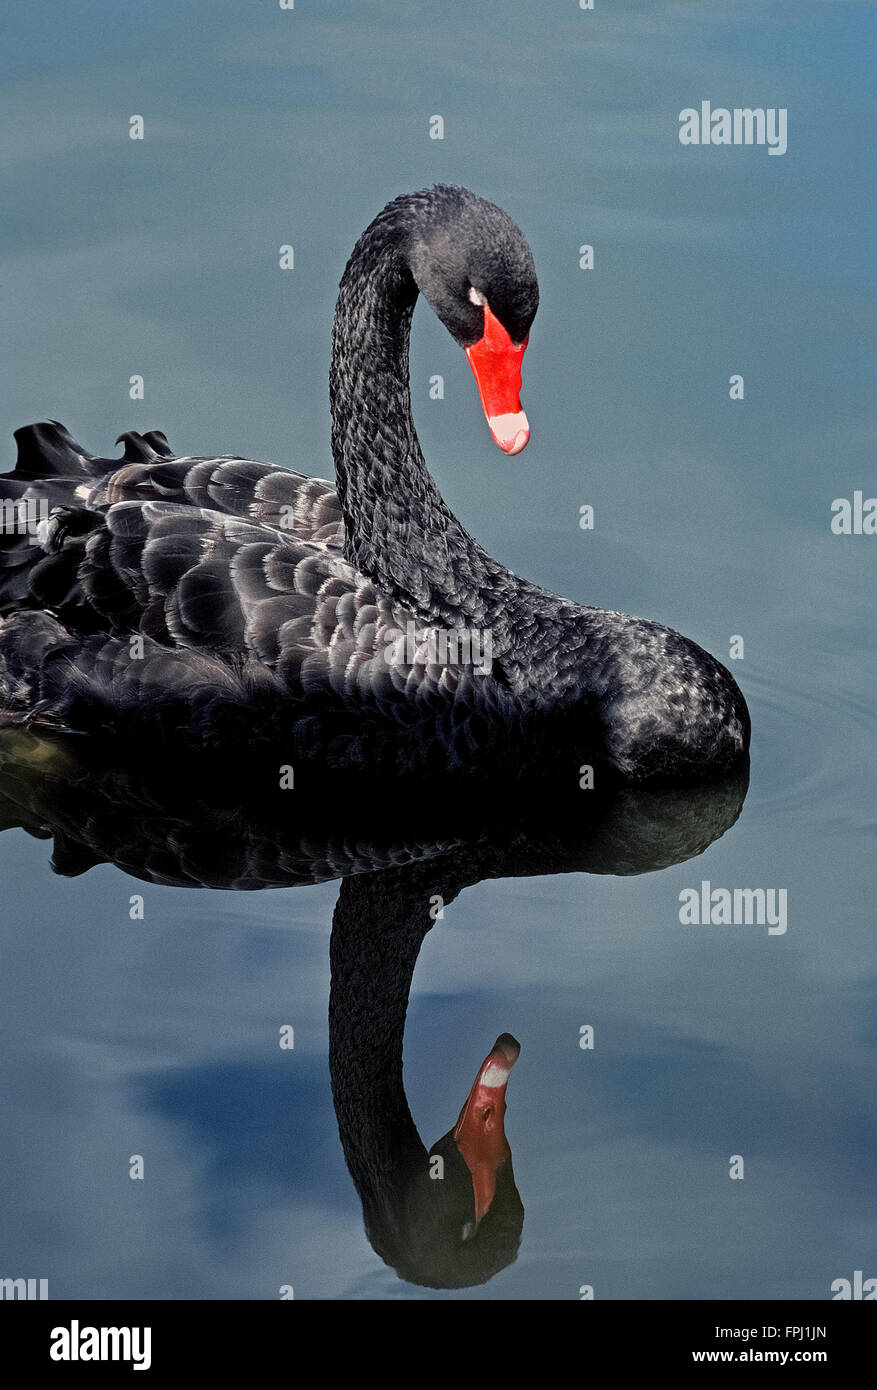 A calm lake reflects the image of a Black Swan (Cygnus atratus), an exotic waterfowl marked by a red bill with a white band near its tip. Stock Photo